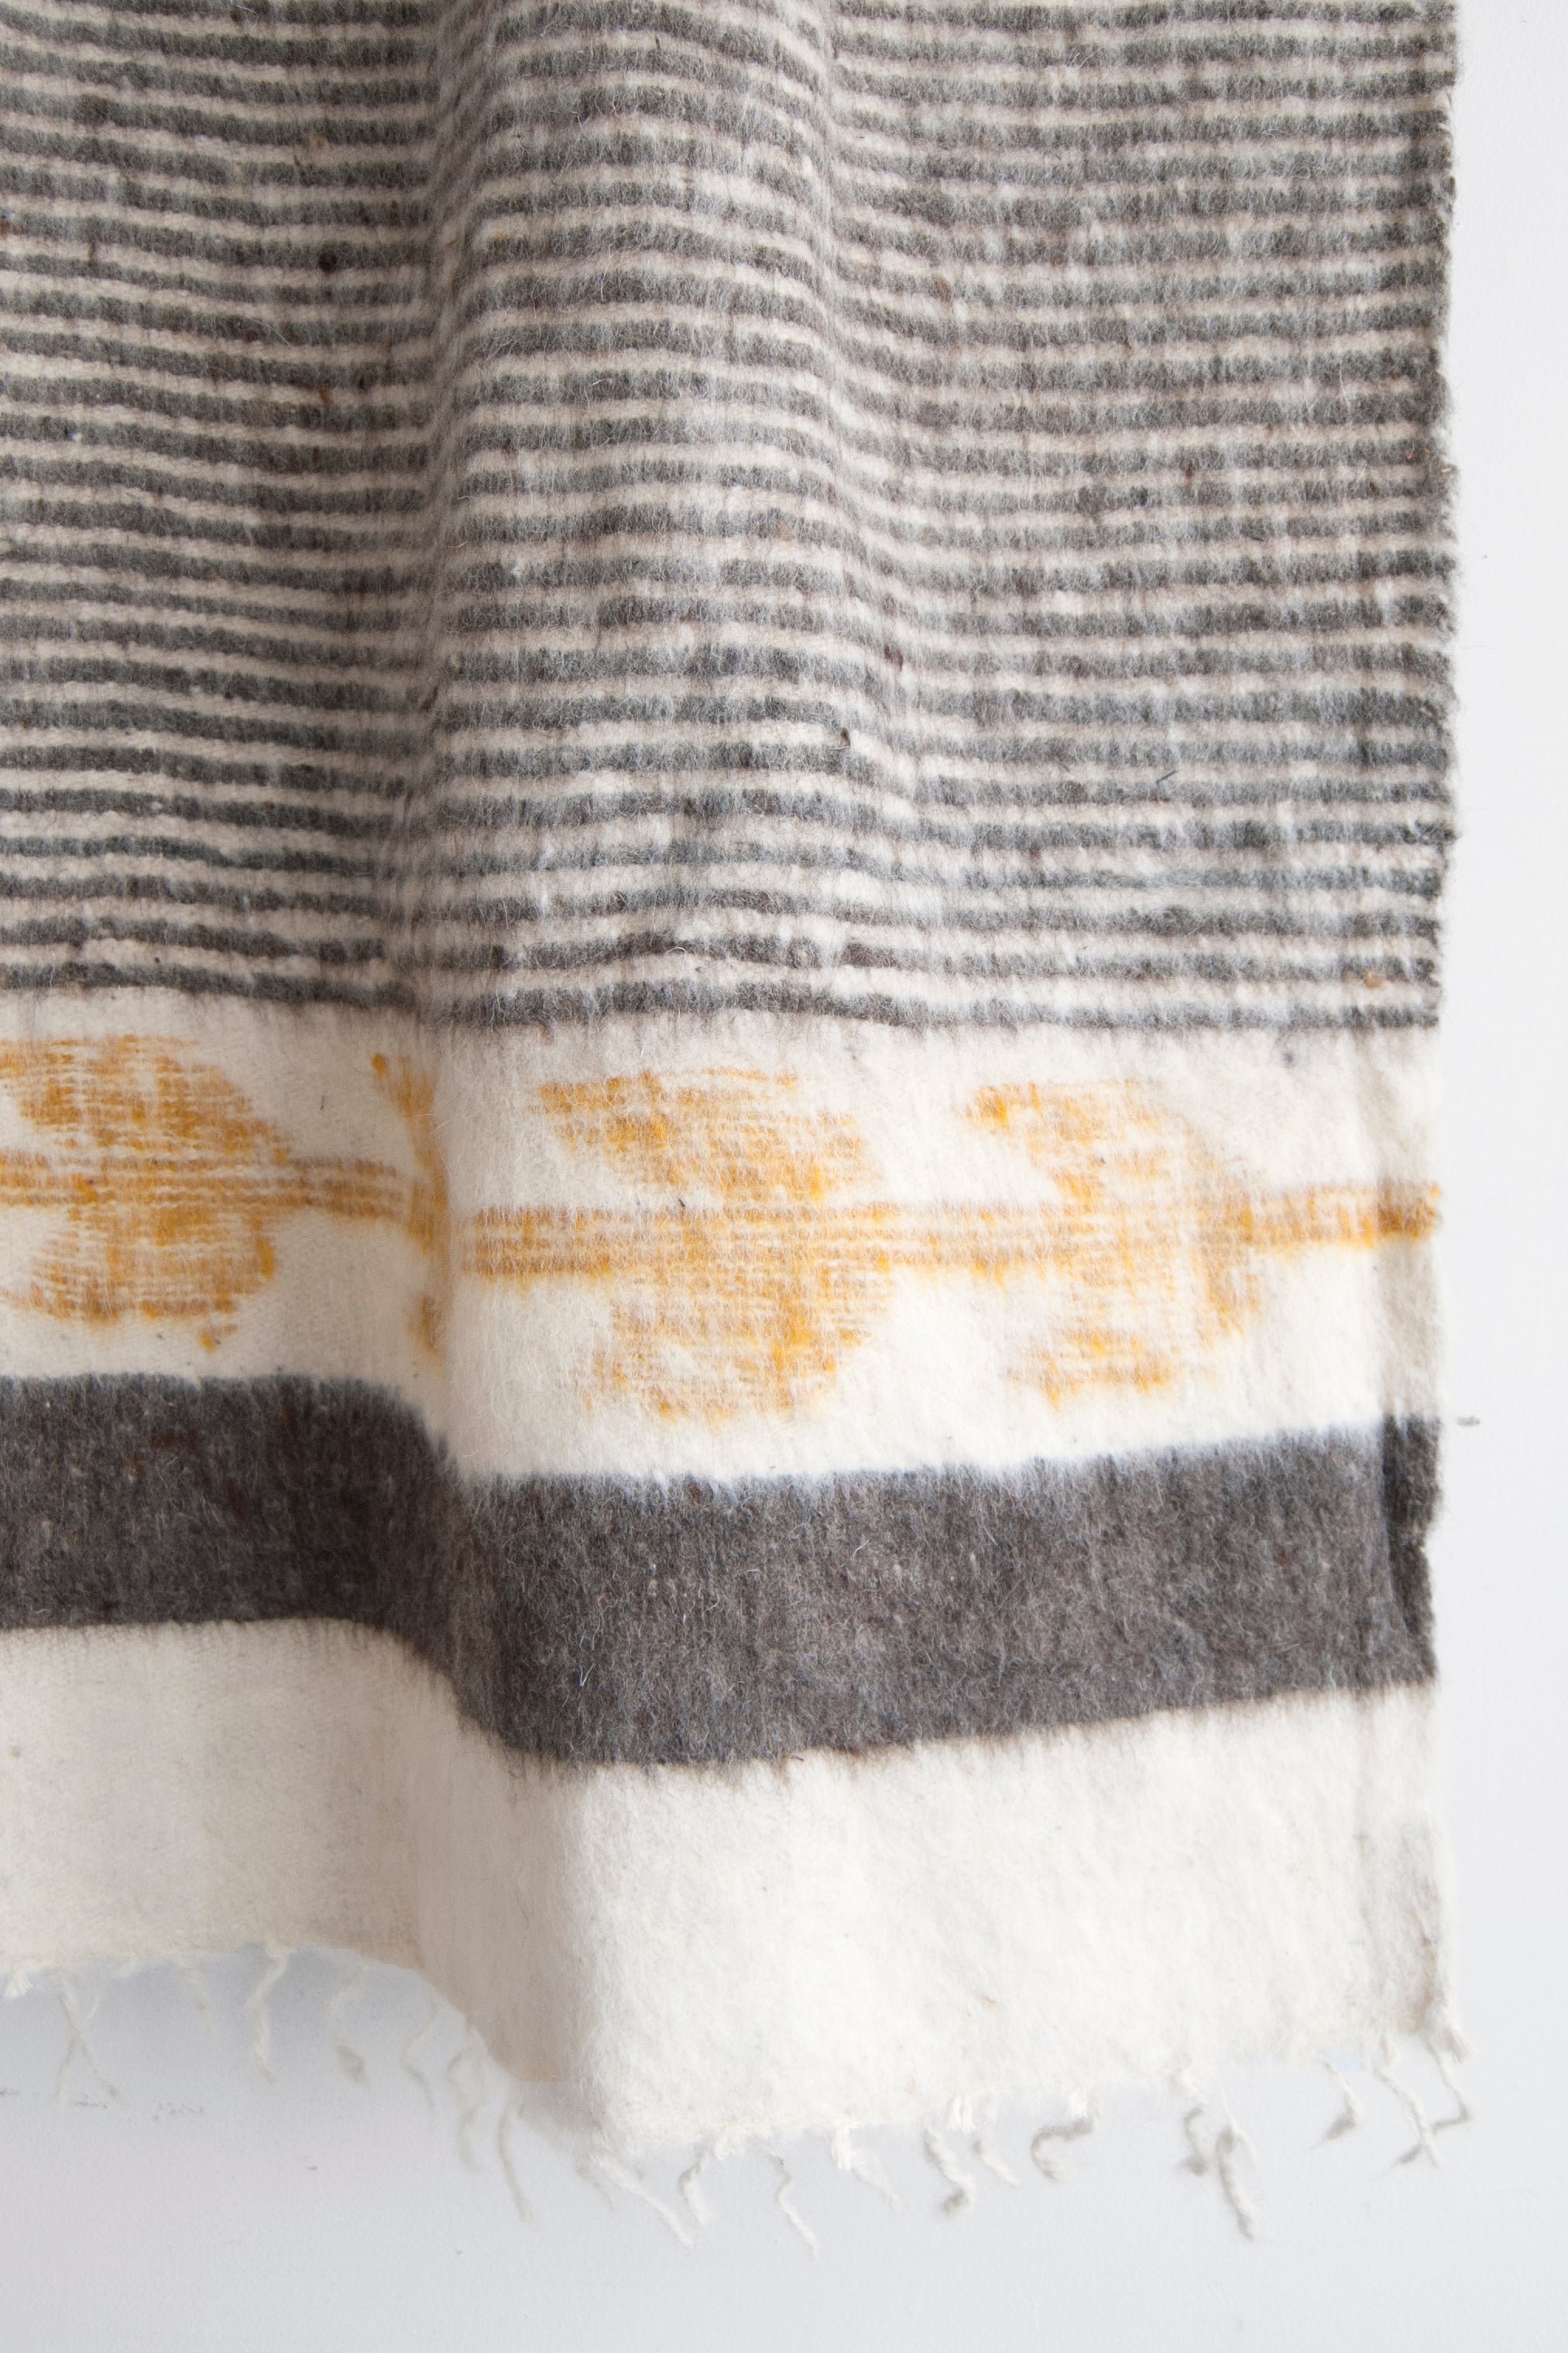 Detail of thin grey stripes and gold arrow motif on queen size ecru wool blanket